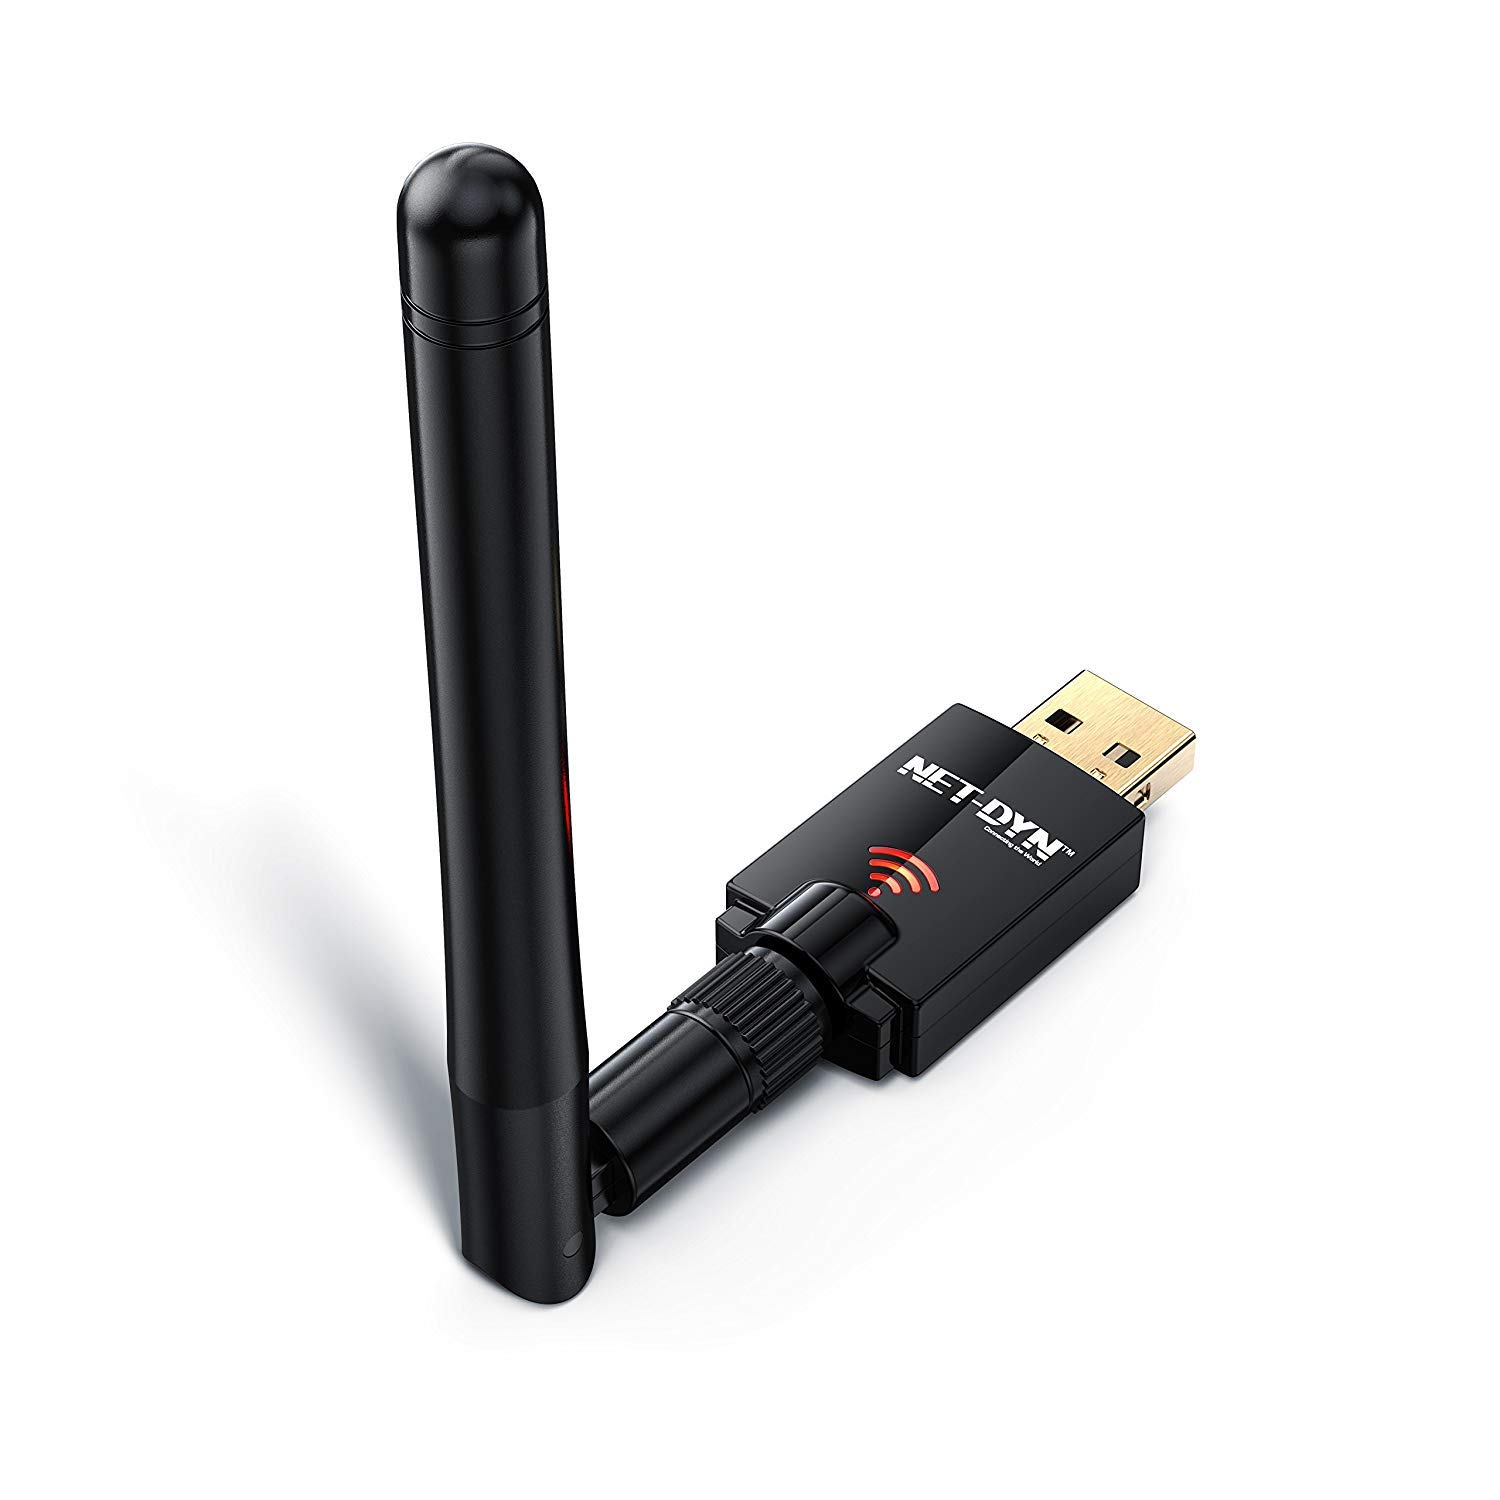 How To Enable Pc Wireless Adapter